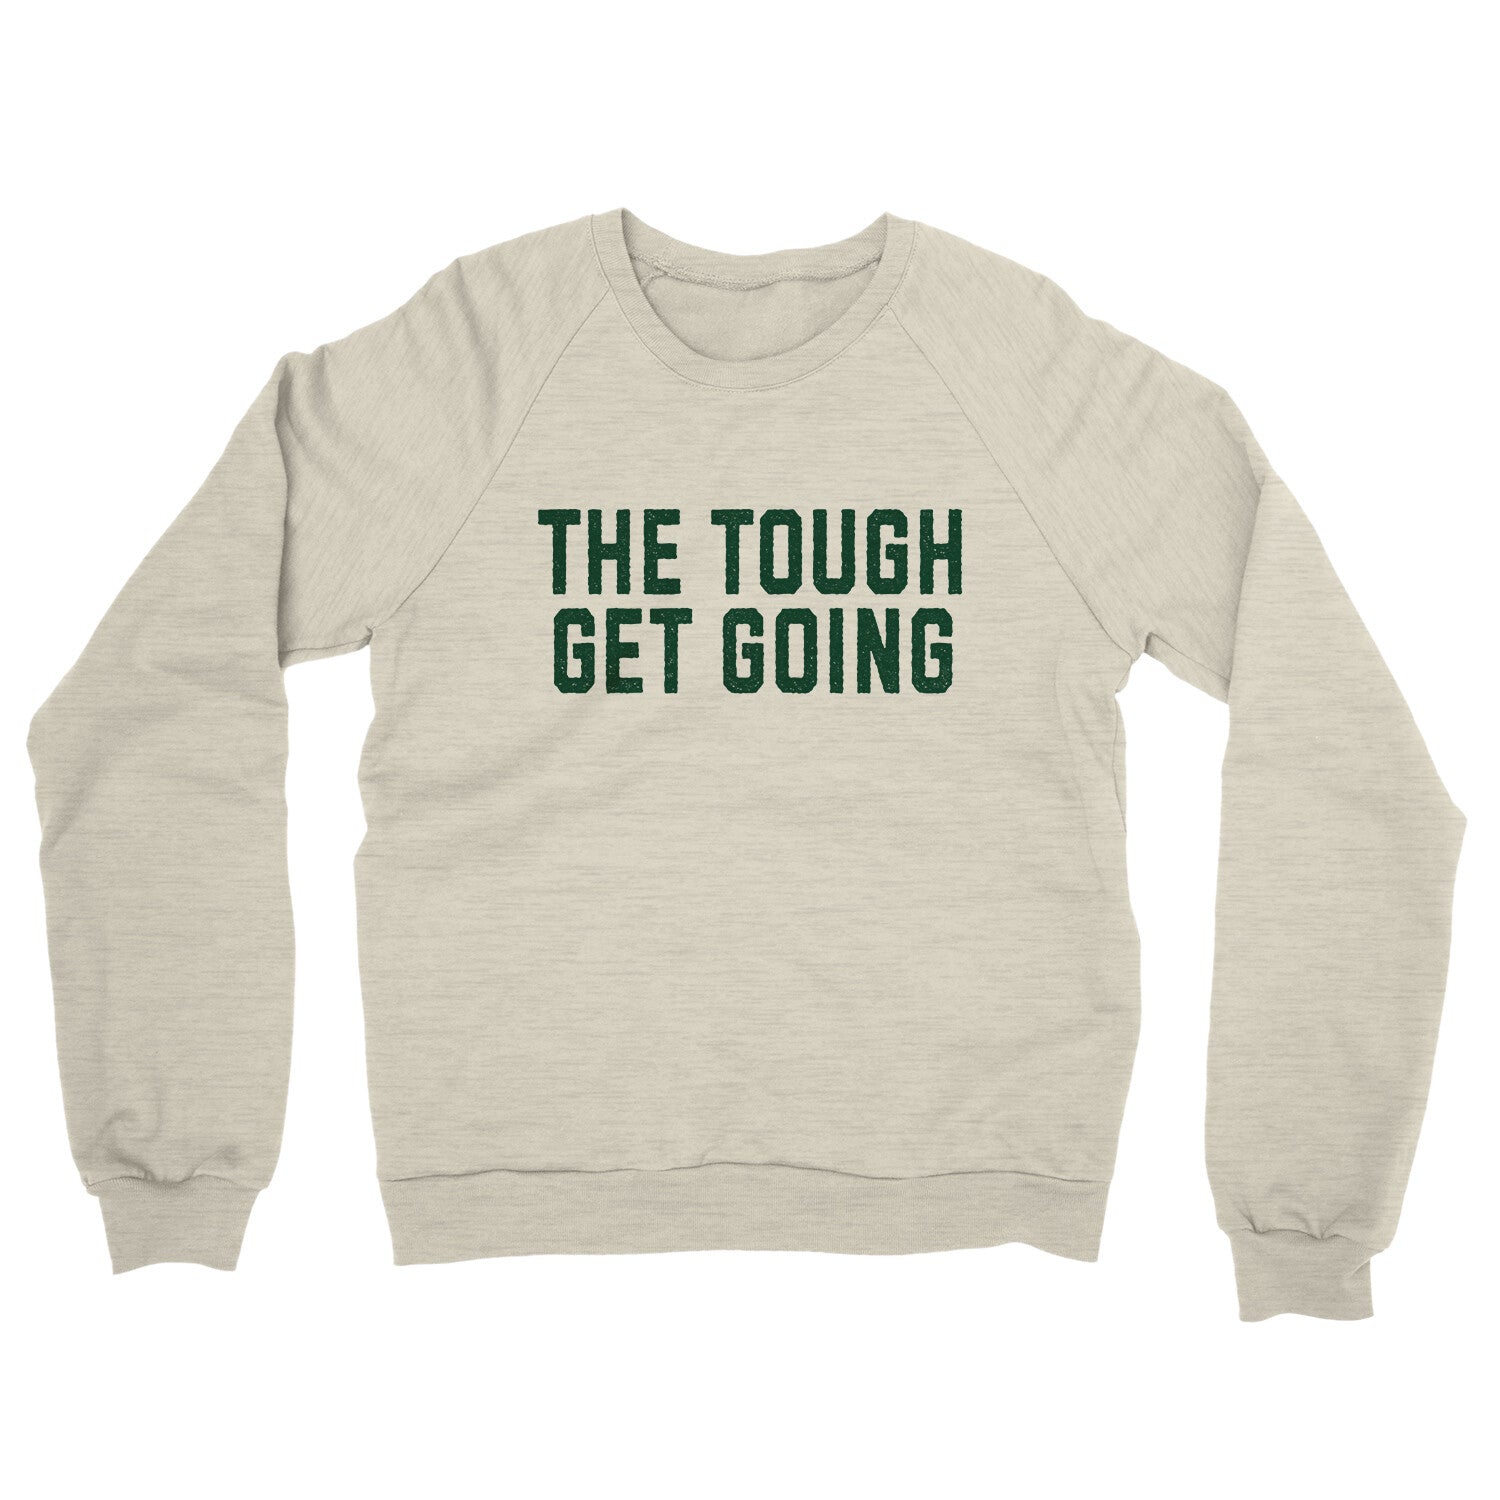 The Tough Get Going in Heather Oatmeal Color